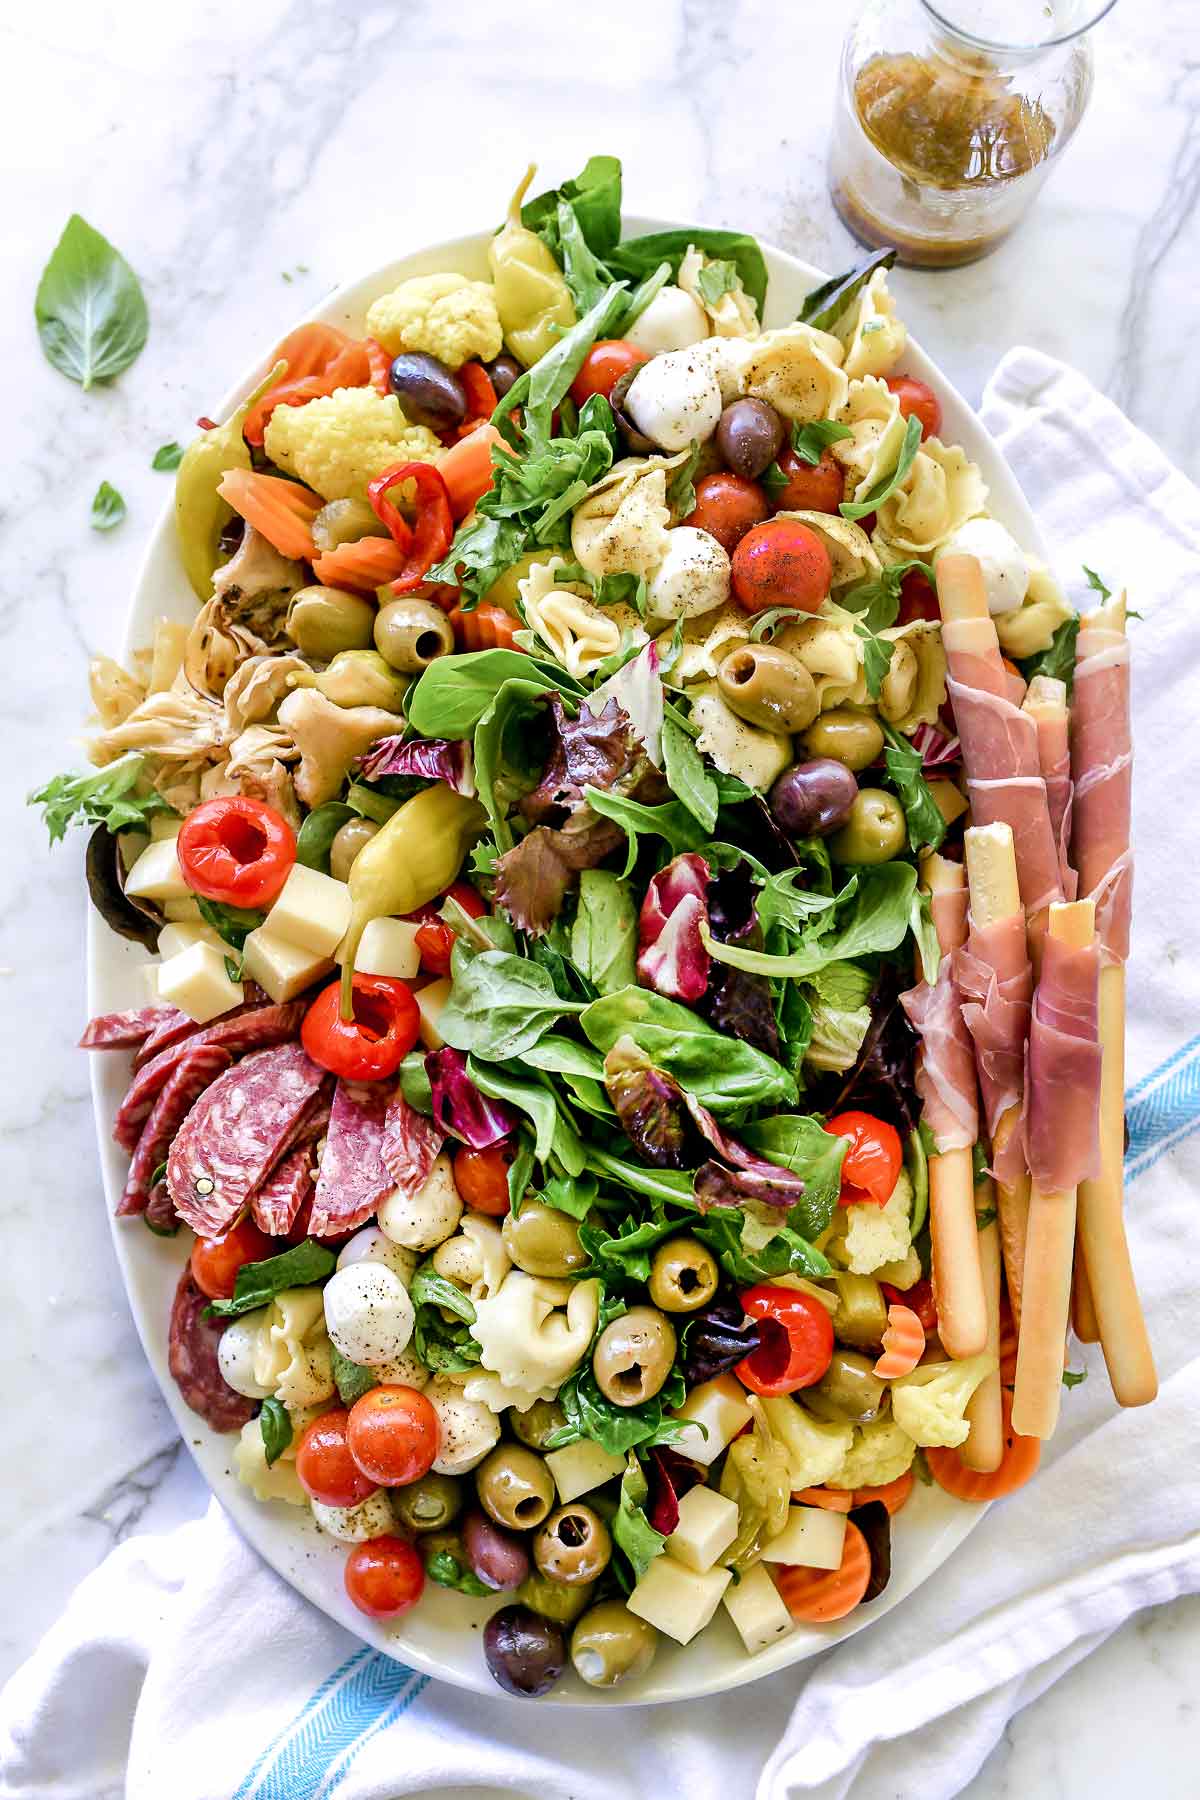 How to Make an Awesome Antipasto Salad Platter